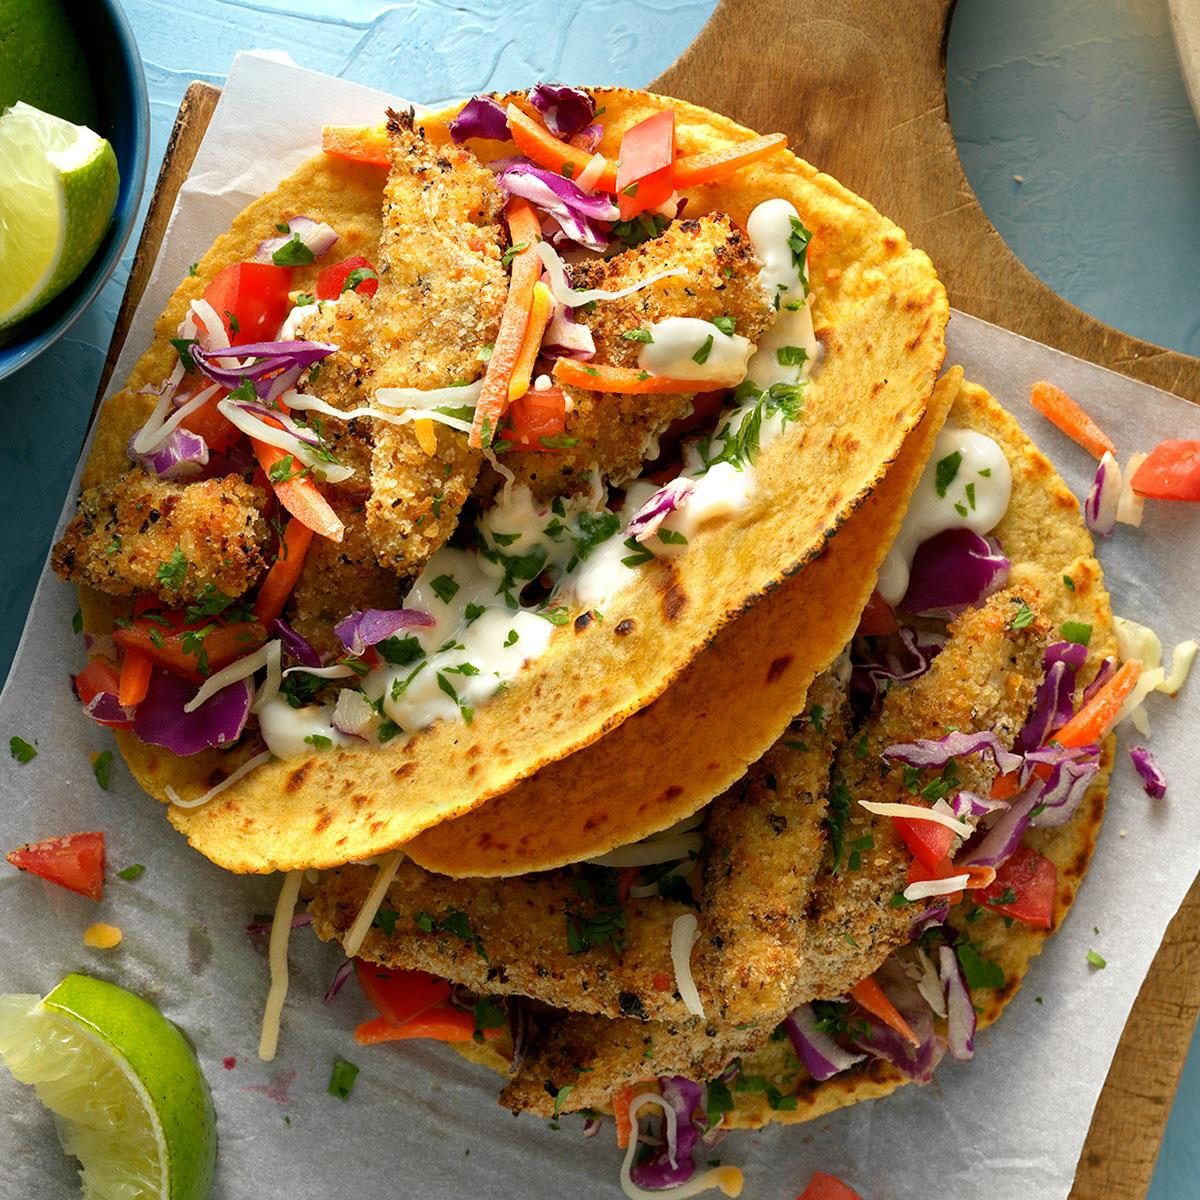 Inspired by: Margaritaville Fish Tacos